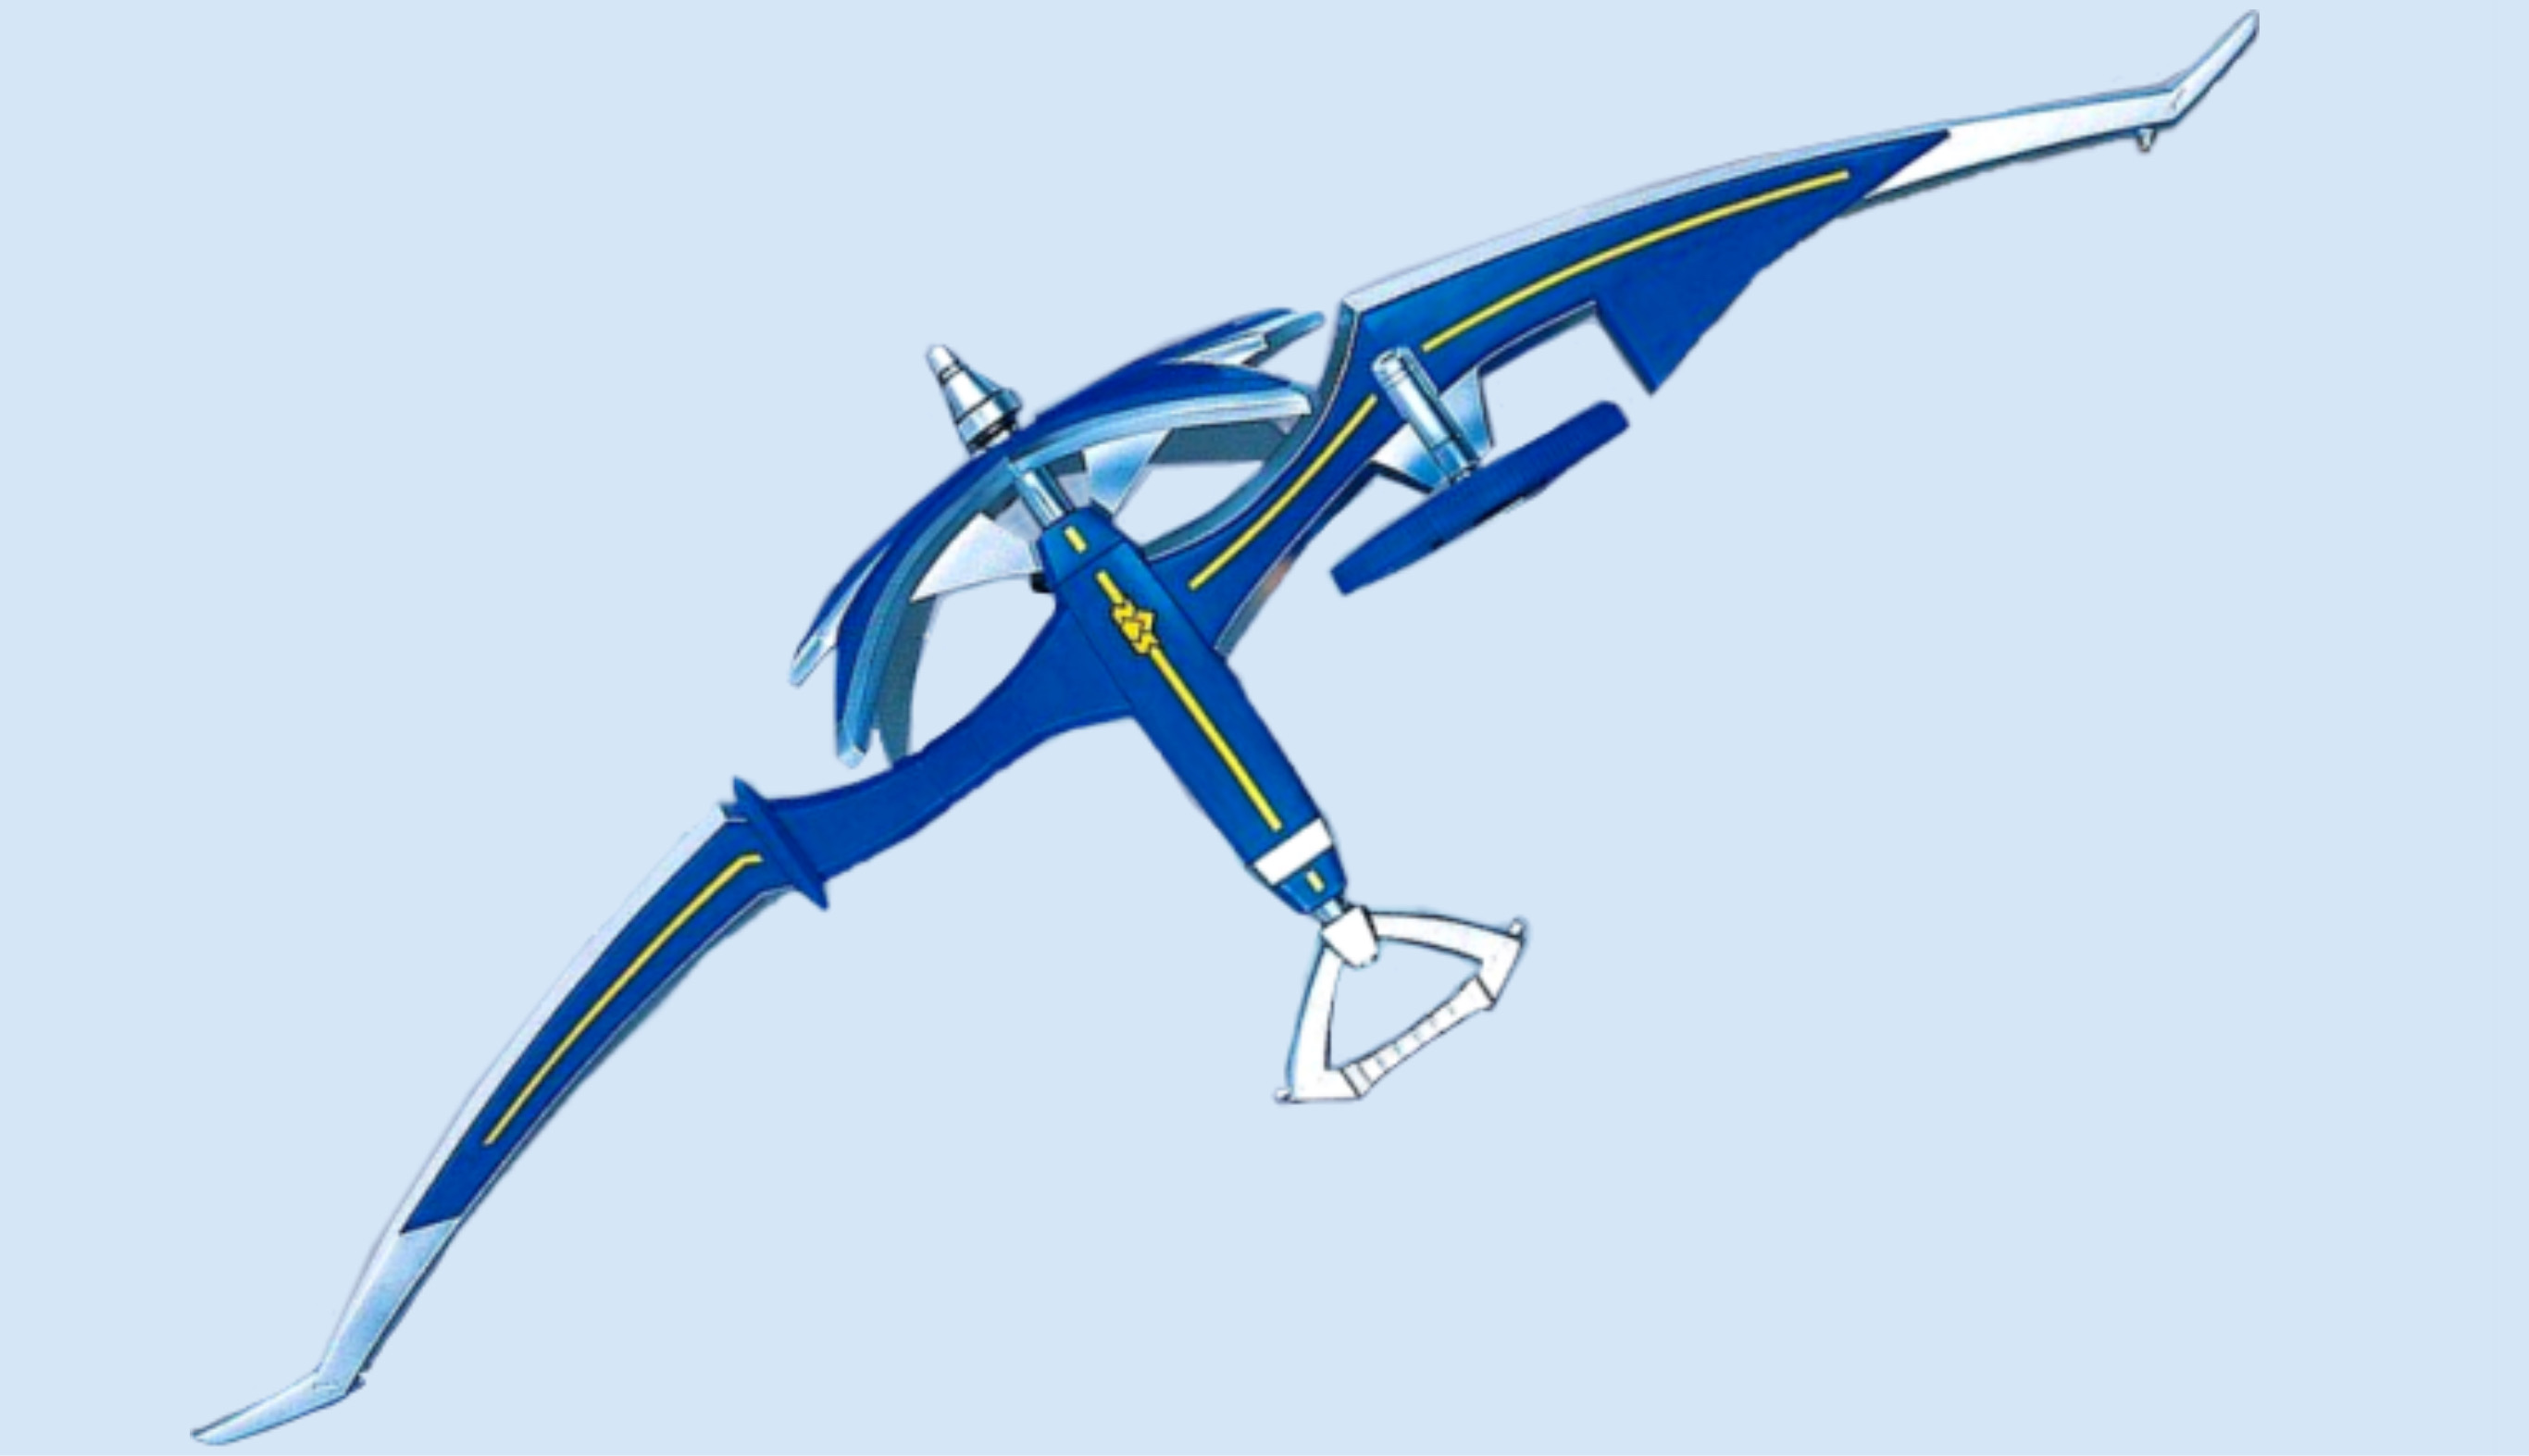 http://images2.wikia.nocookie.net/__cb20091228195927/powerrangers/images/a/a1/ShinkenWeapon2.jpg